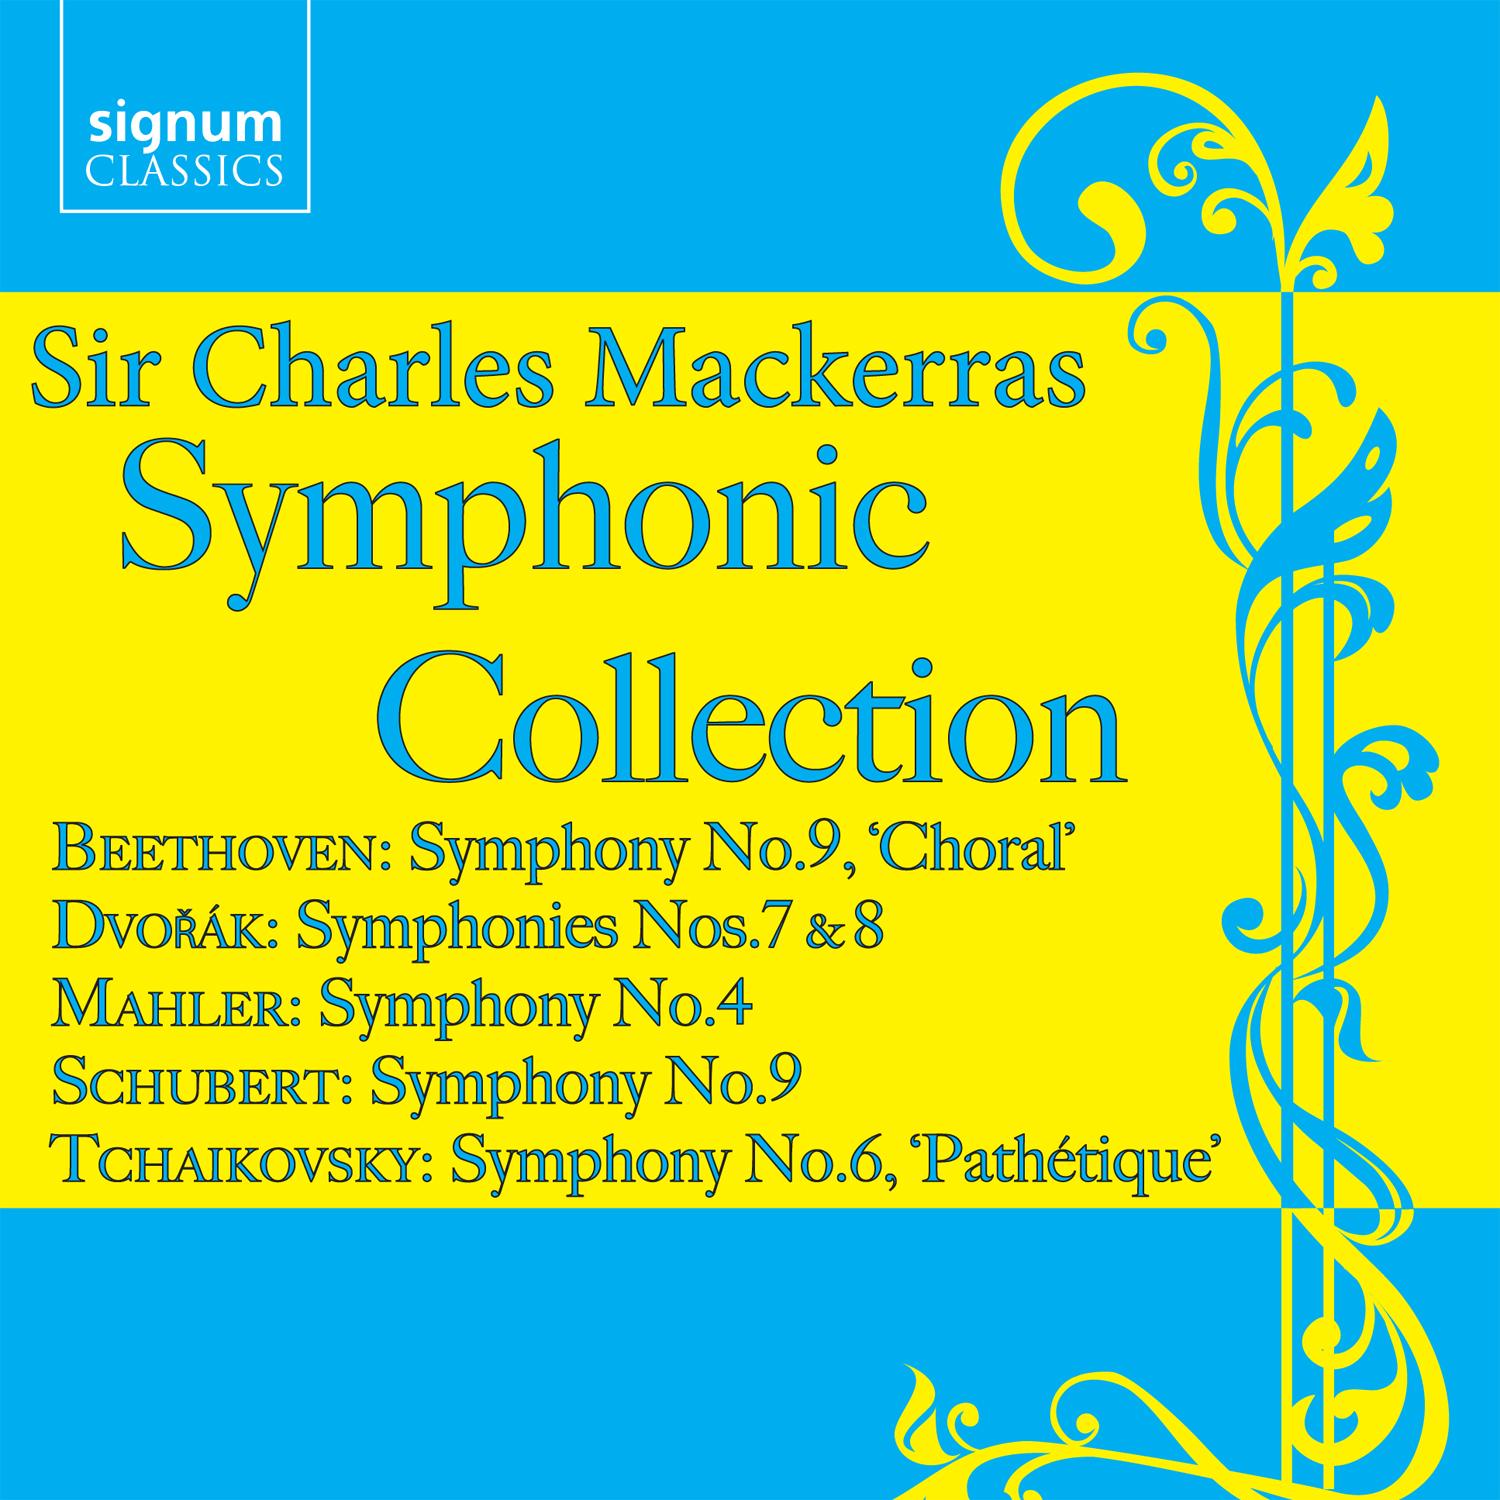 Sir Charles Mackerras: Symphonic Collection